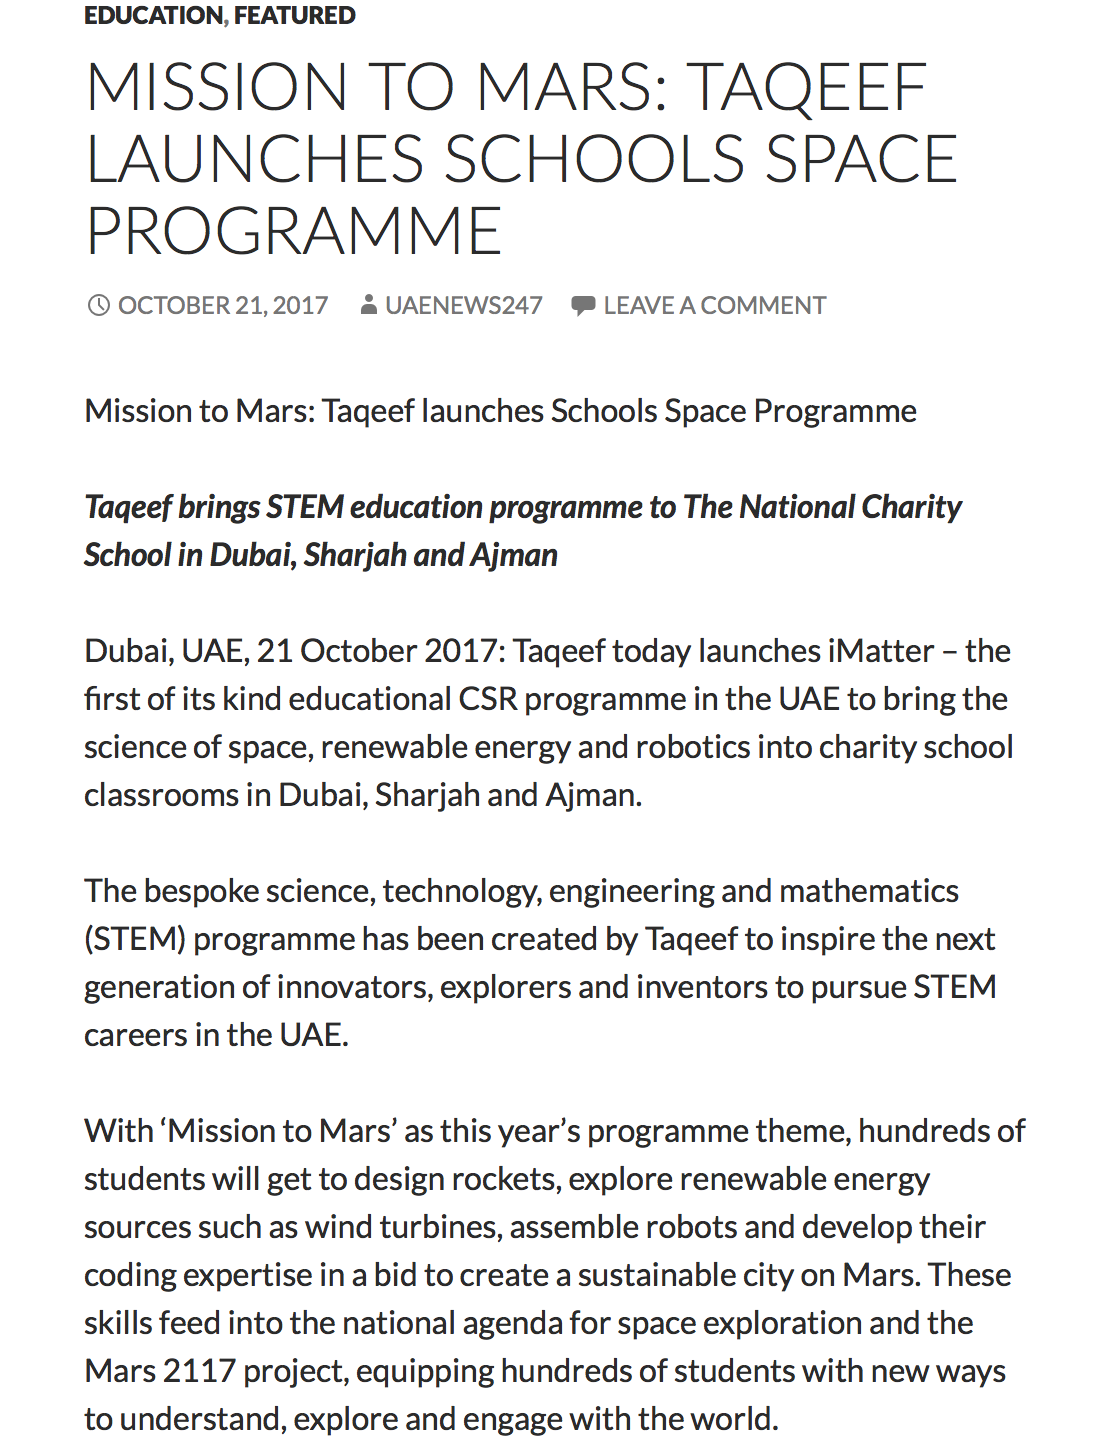 Mission to Mars: Taqeef launches Schools Space Programme